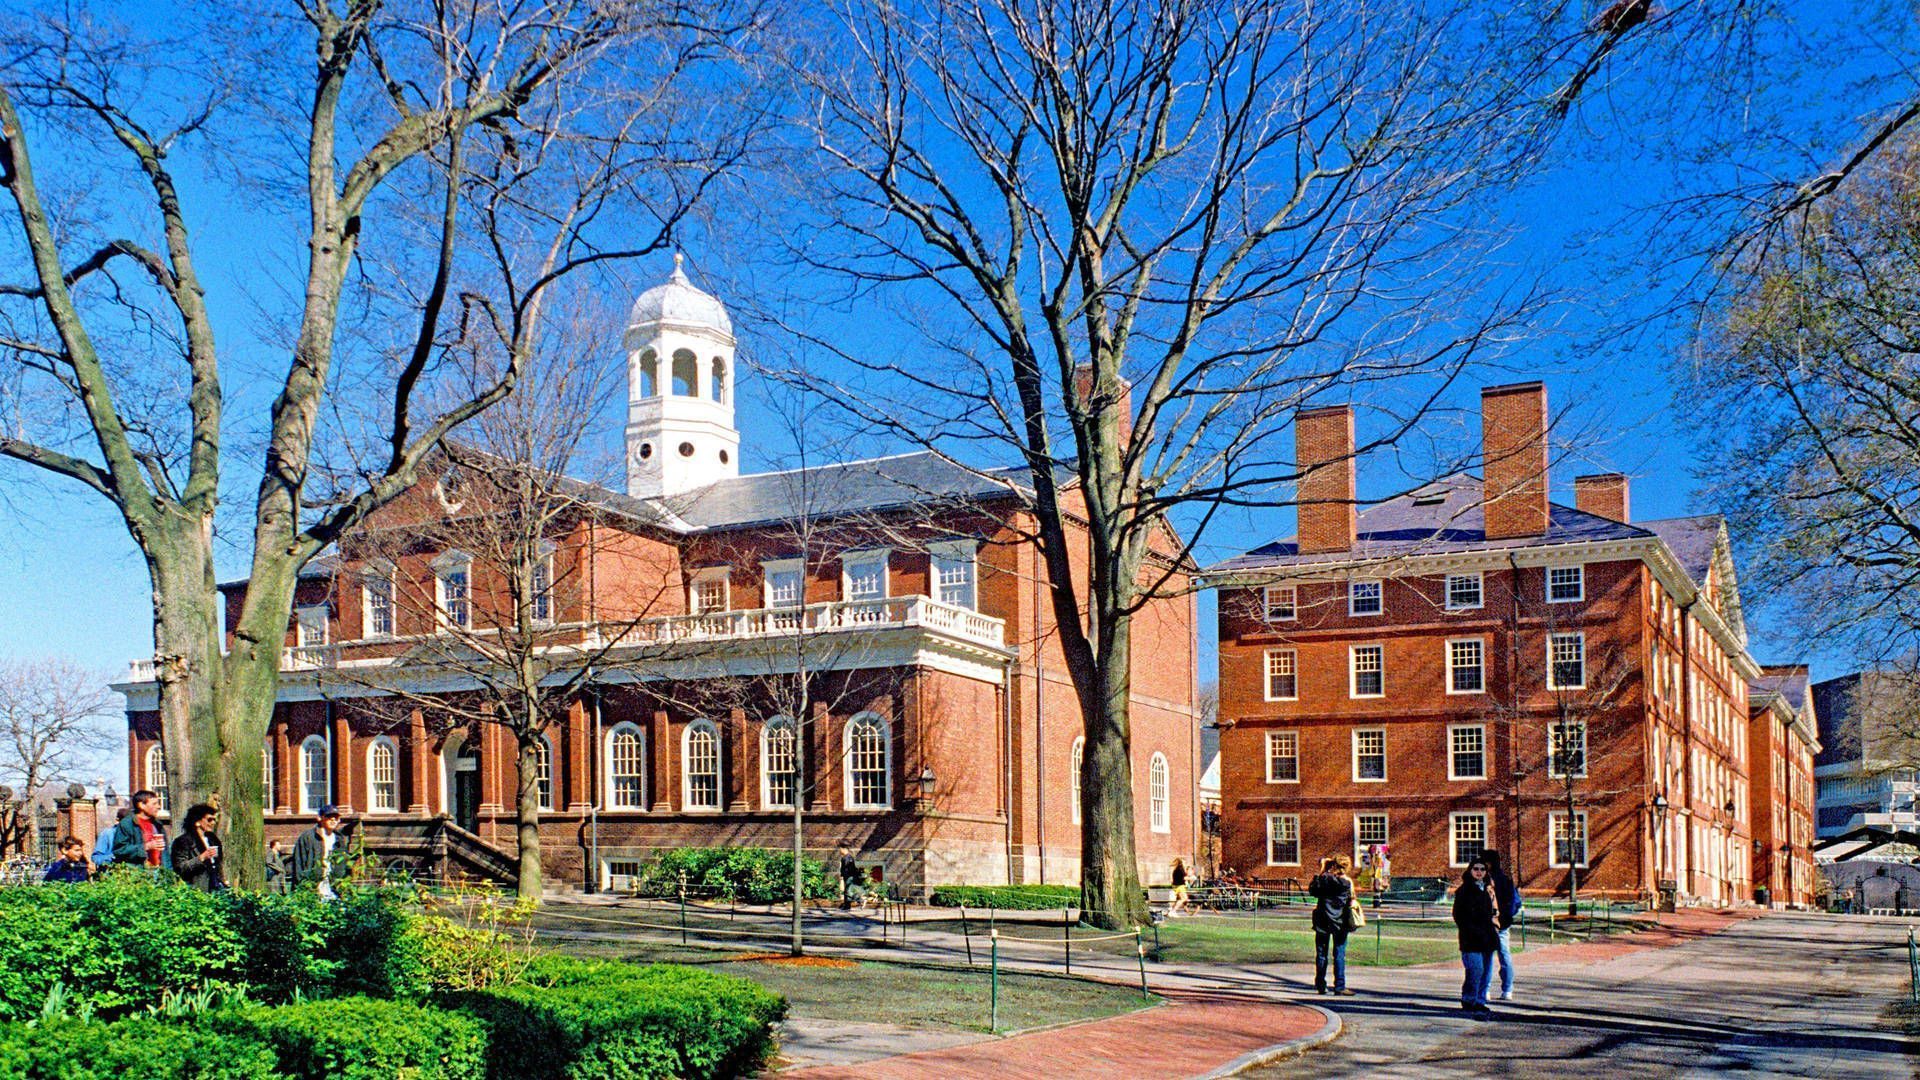 A red brick building with a white cupola is seen in the background. - Harvard